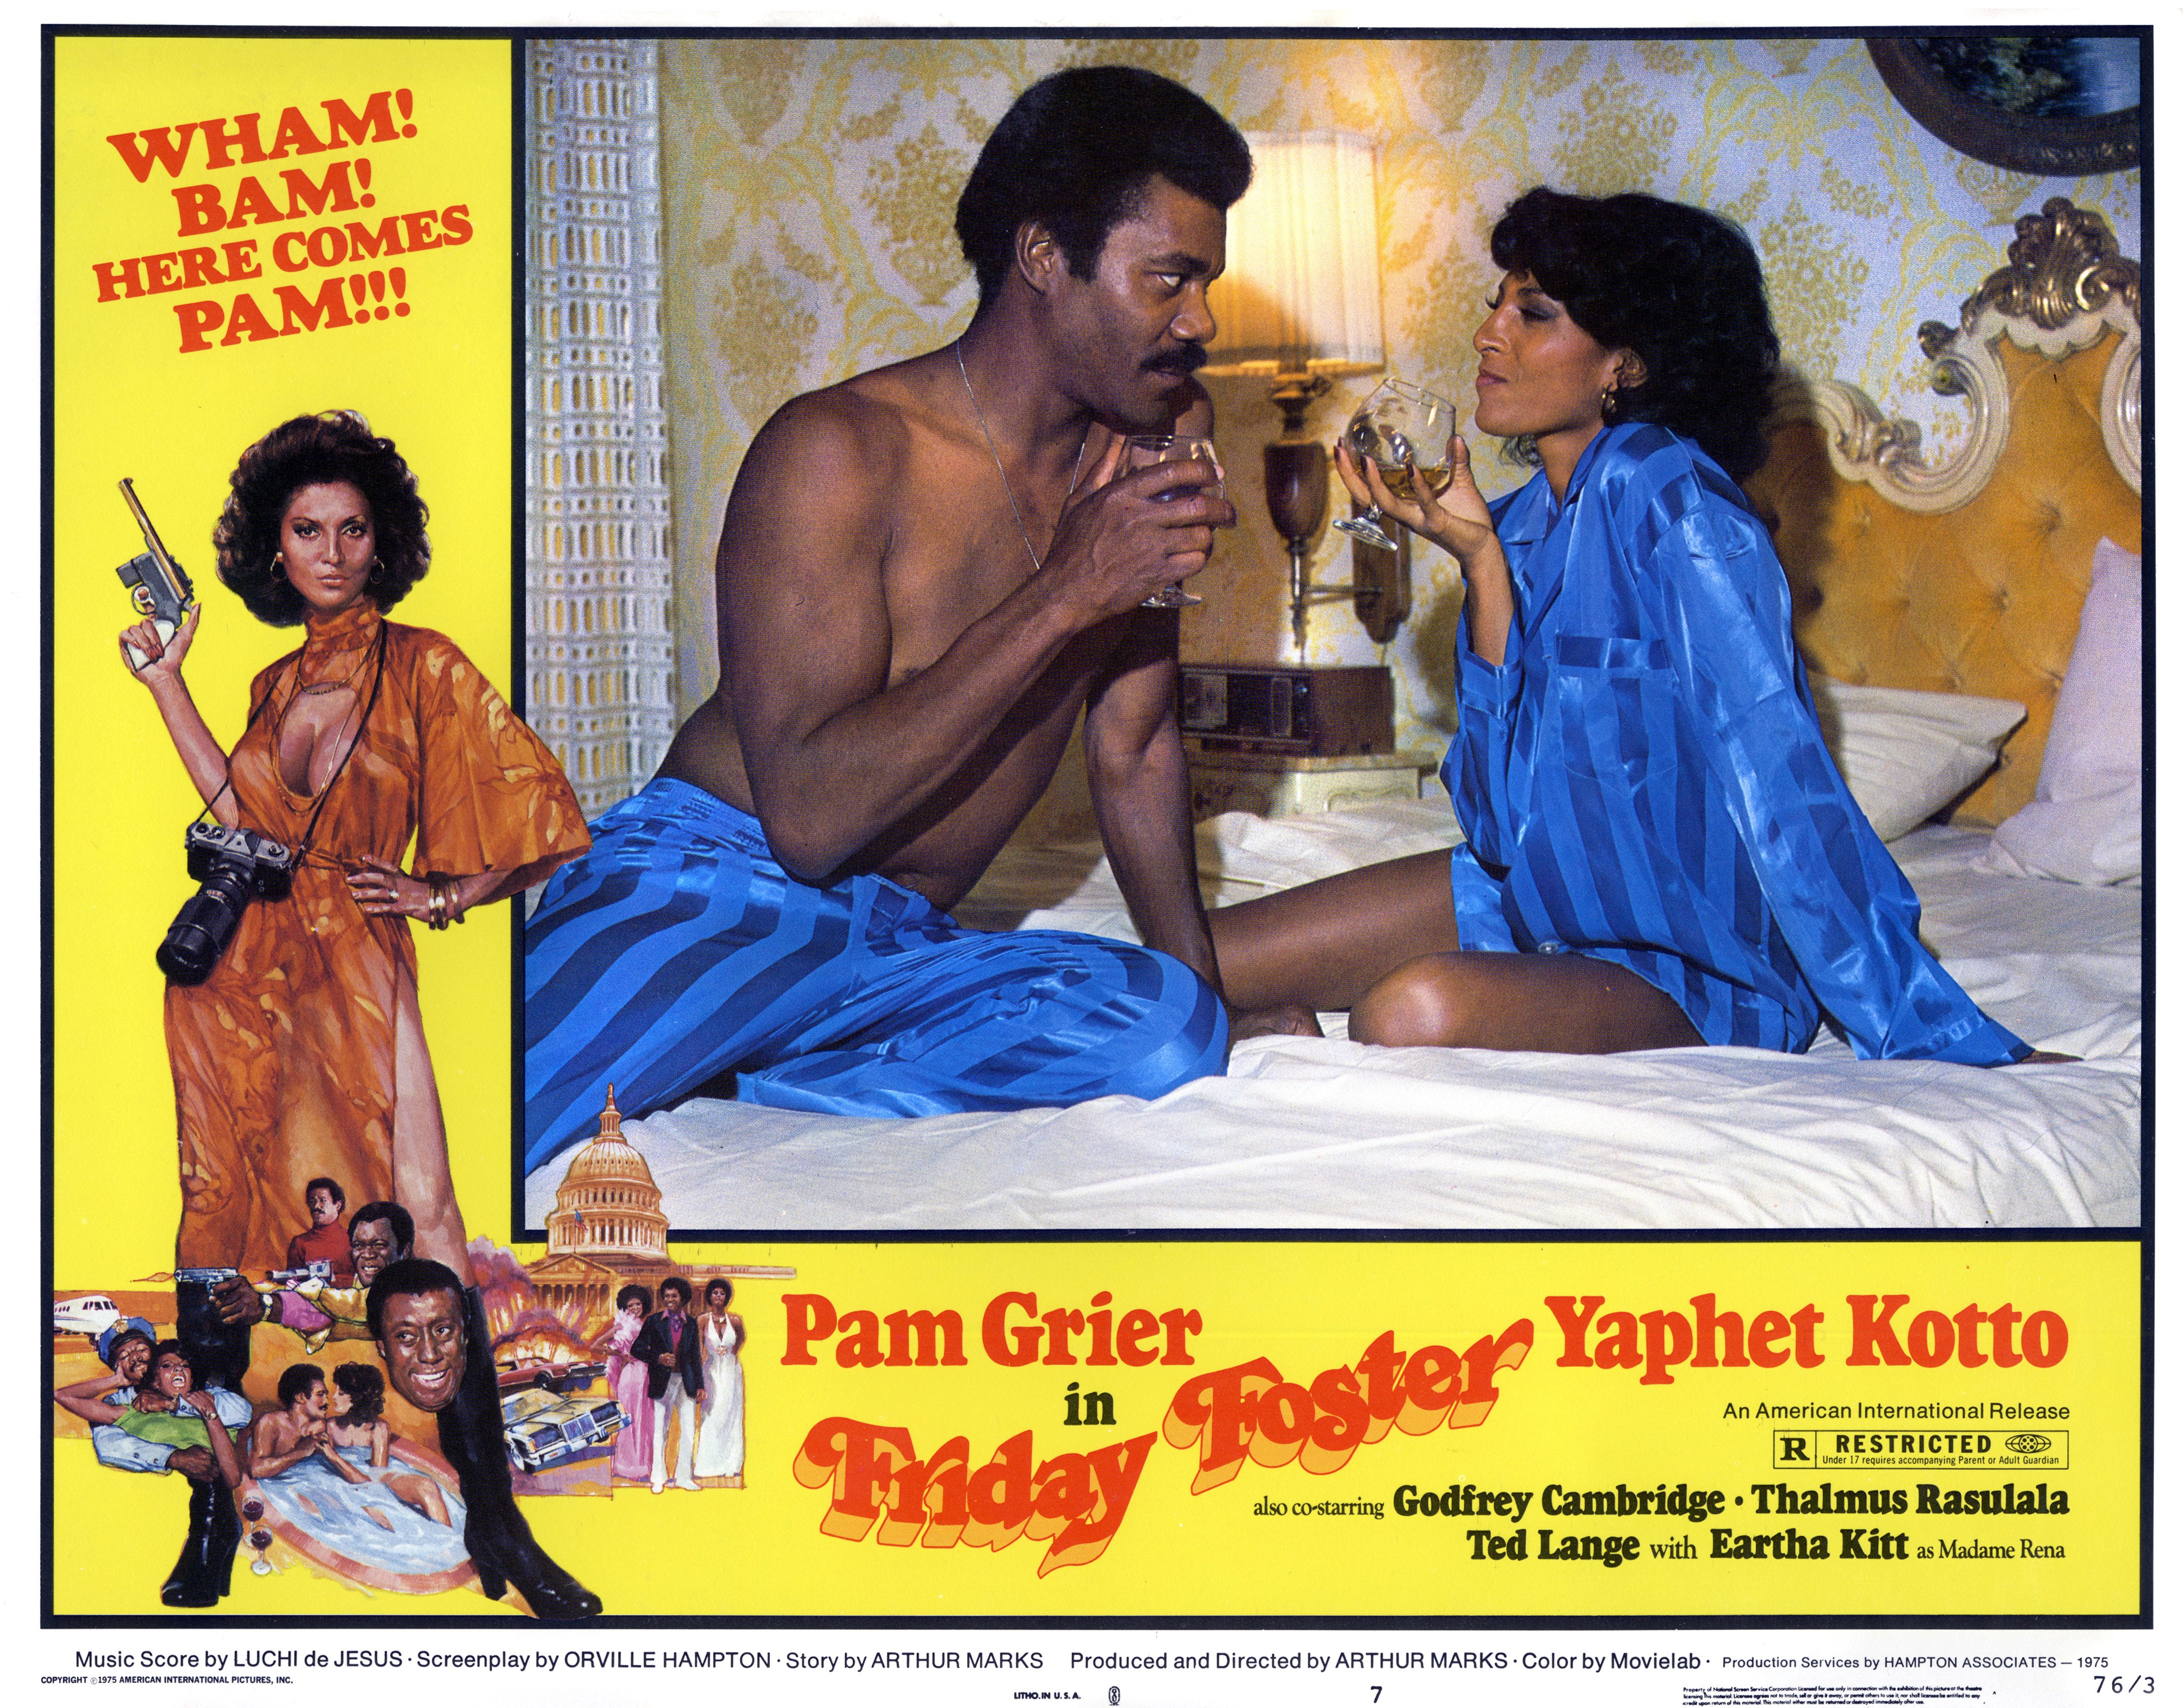 This is the lobby card from Friday Foster.